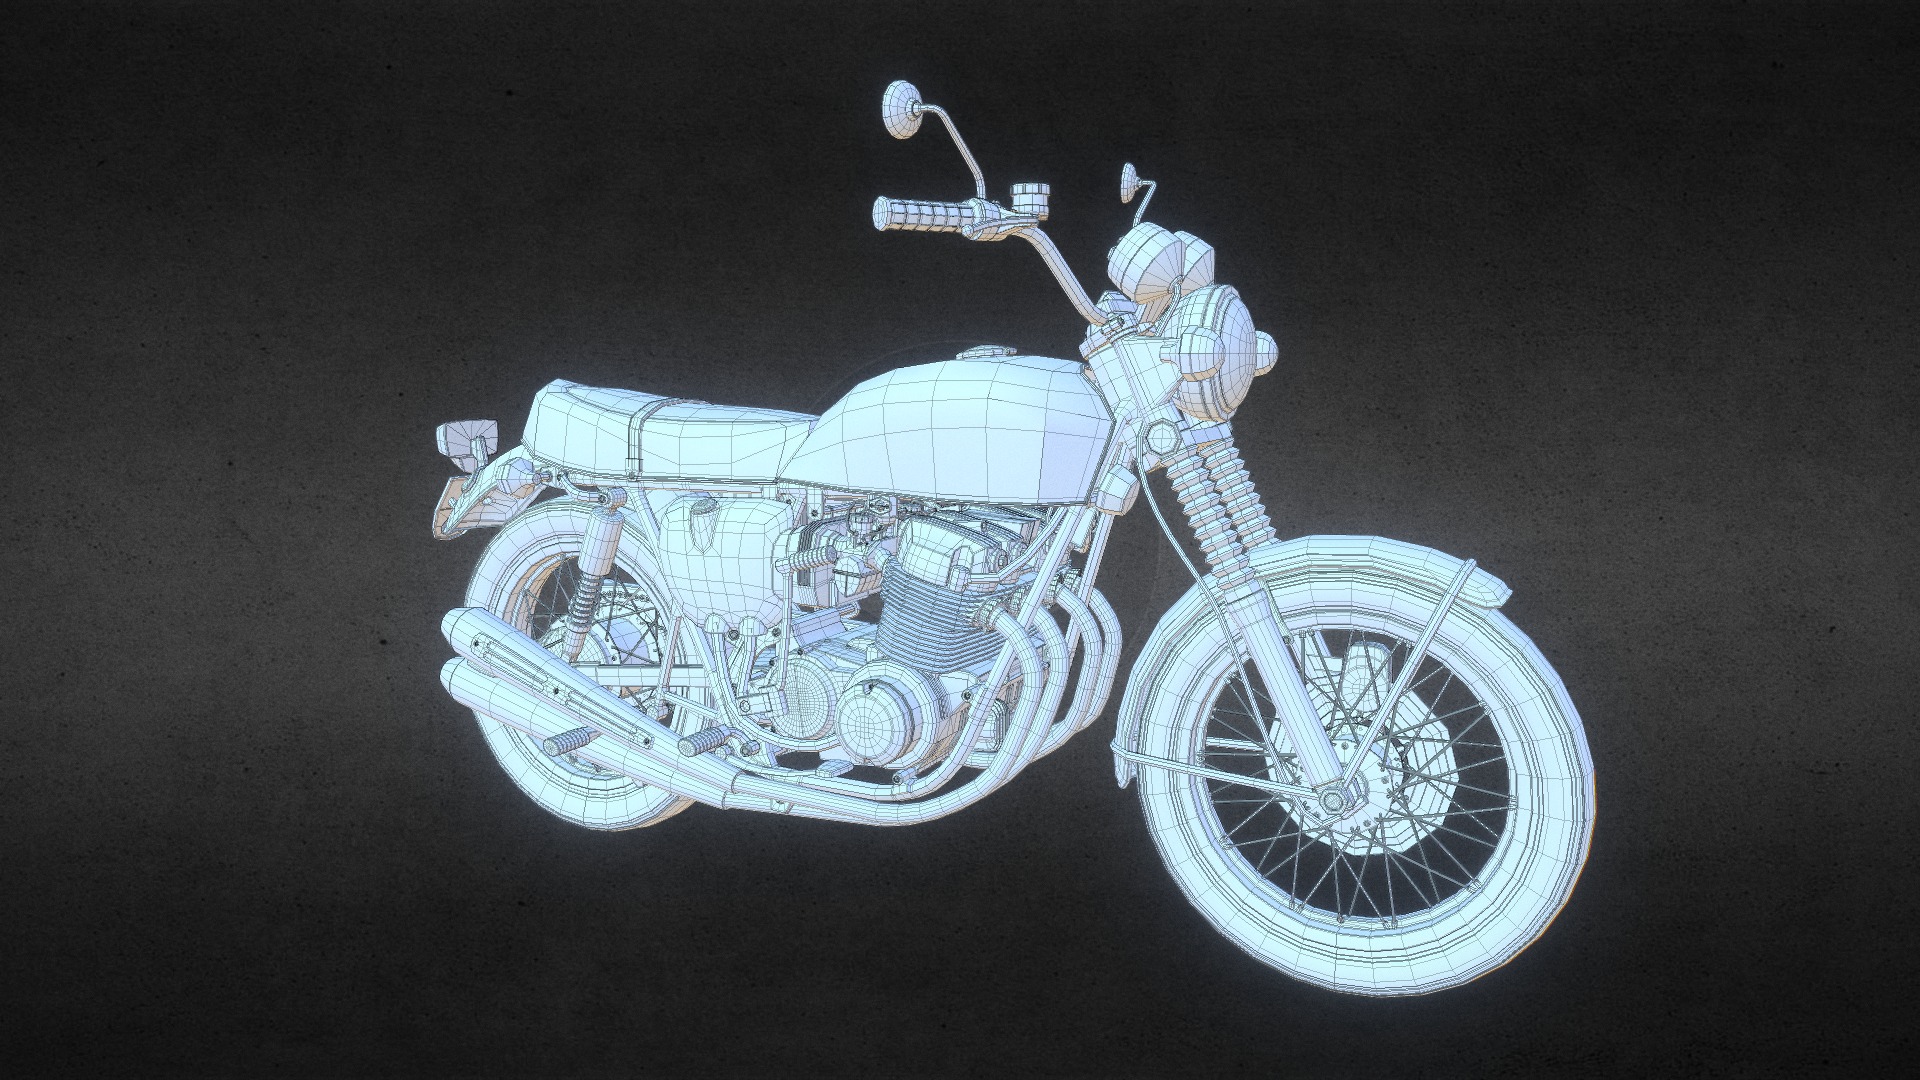 3D model Honda CB 750 Four - This is a 3D model of the Honda CB 750 Four. The 3D model is about a motorcycle with a person on it.